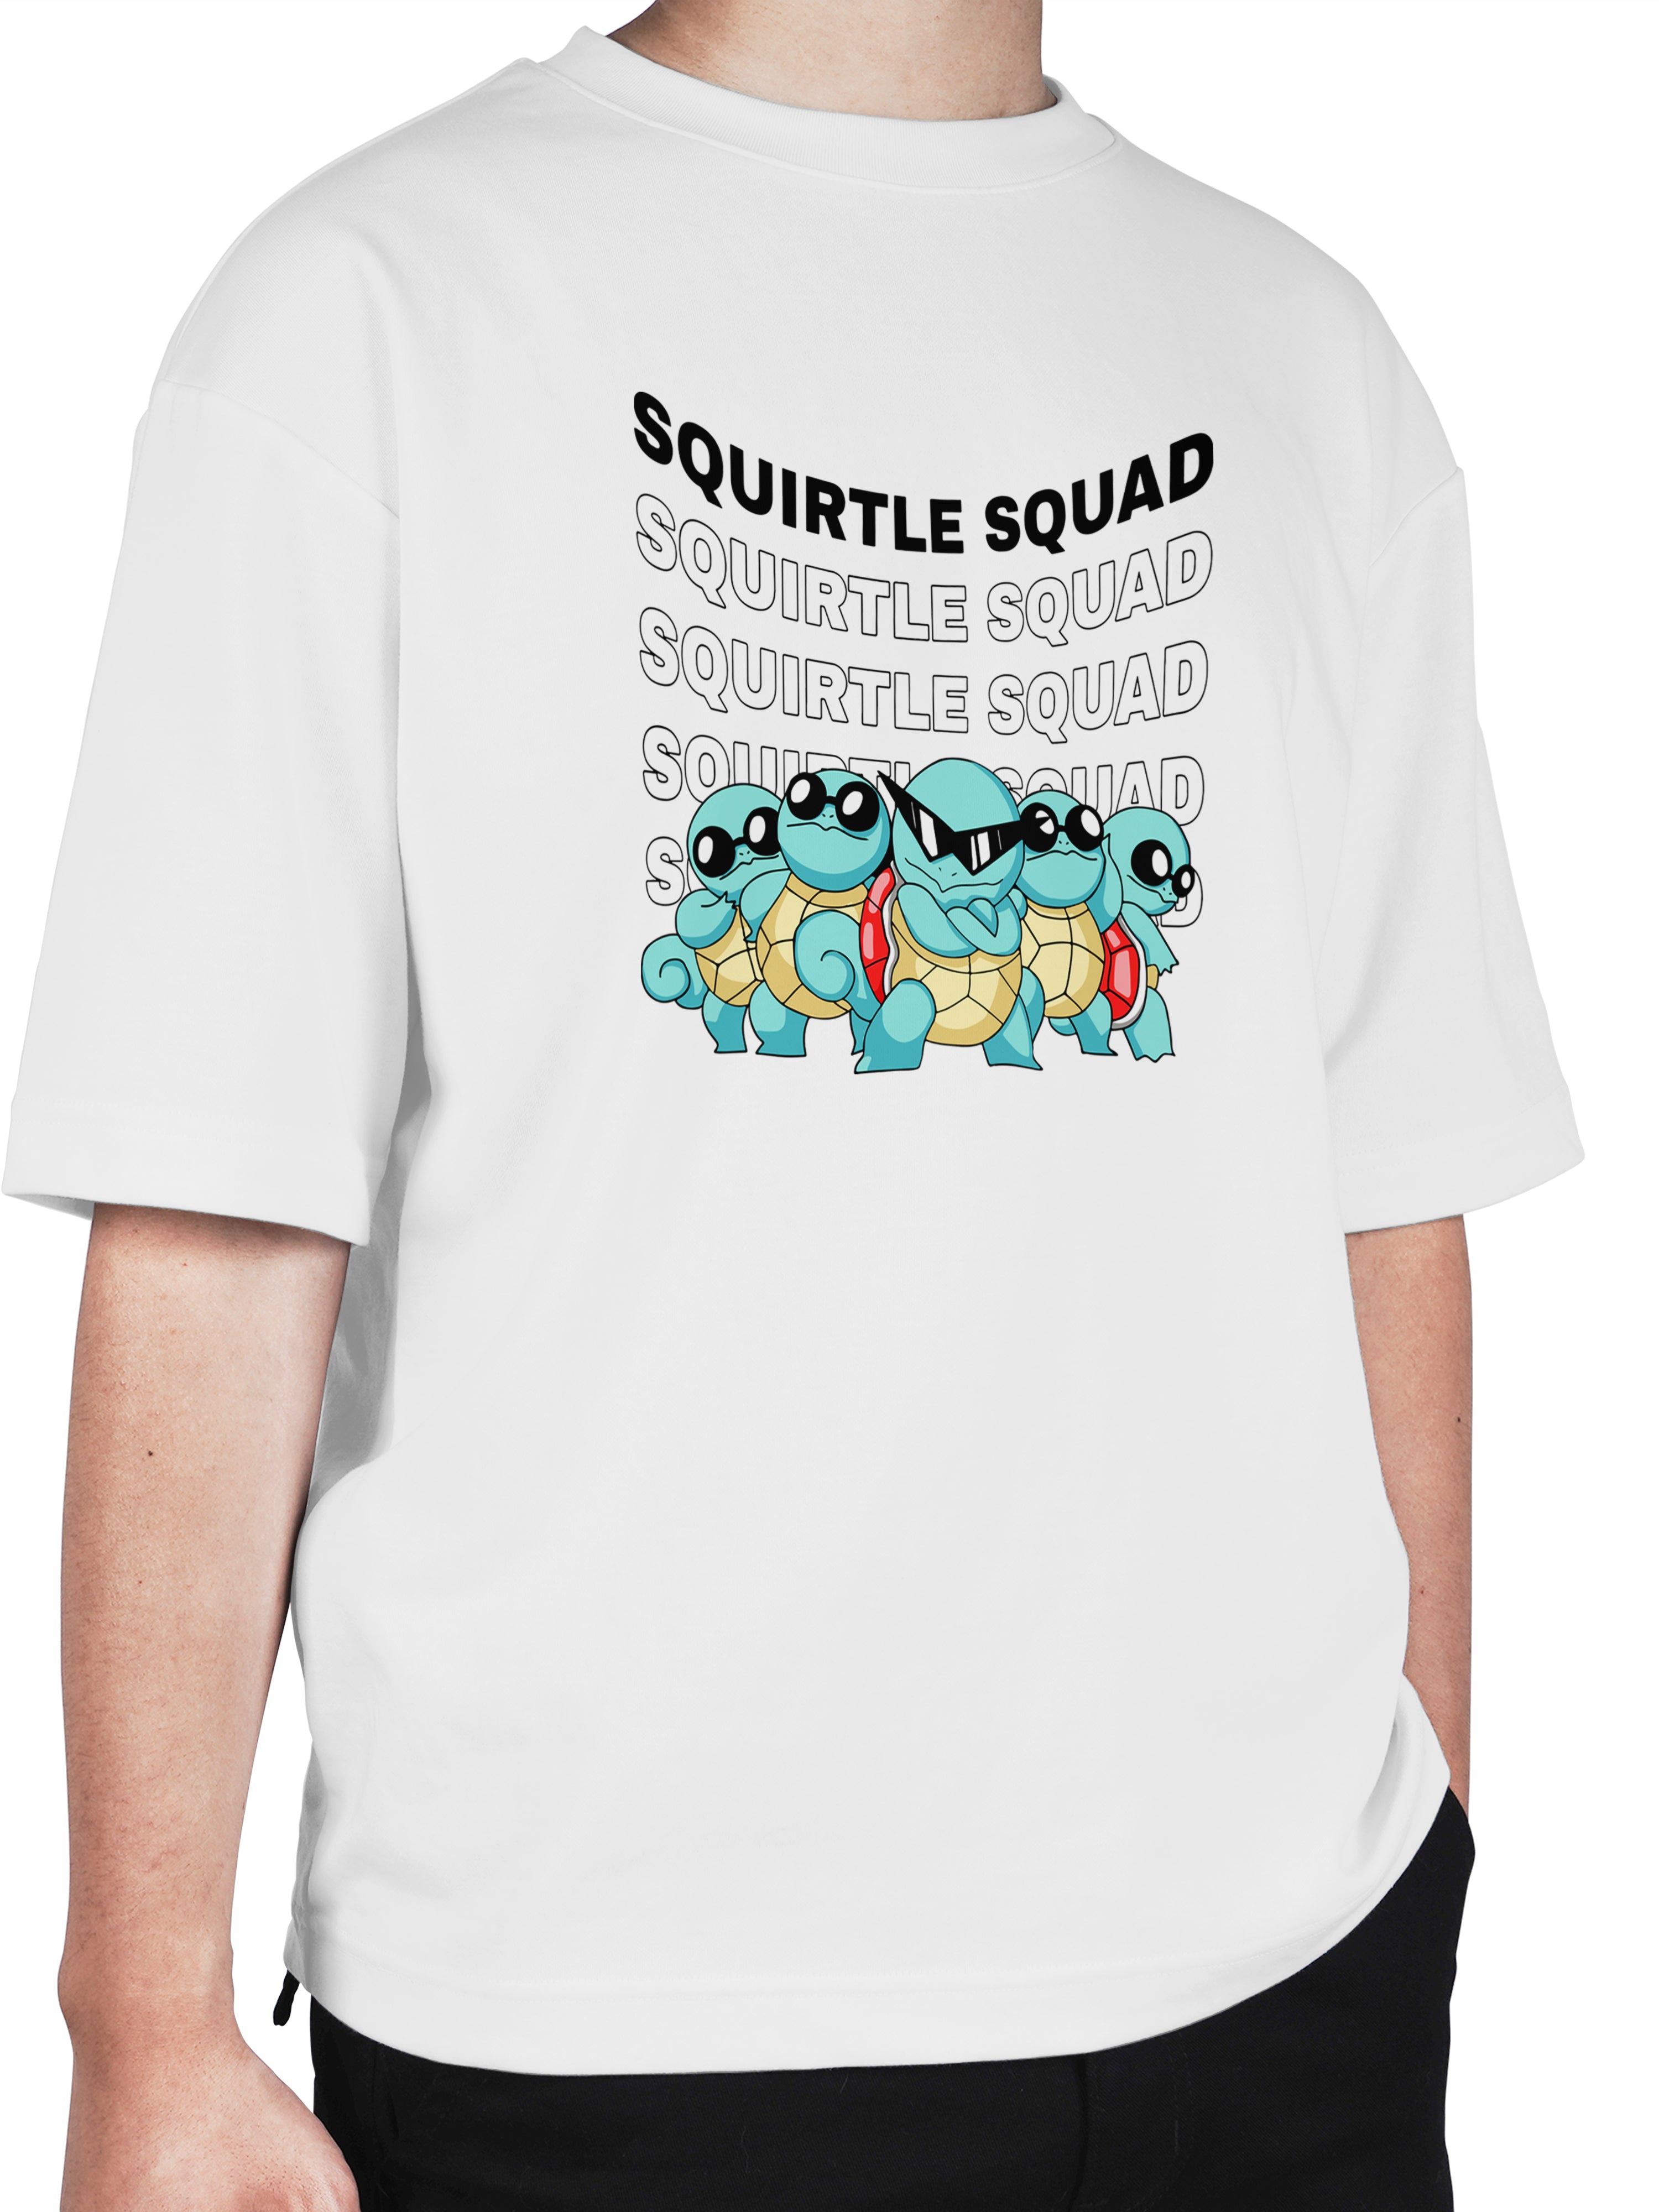 Squirtle Squad H/S T-Shirt